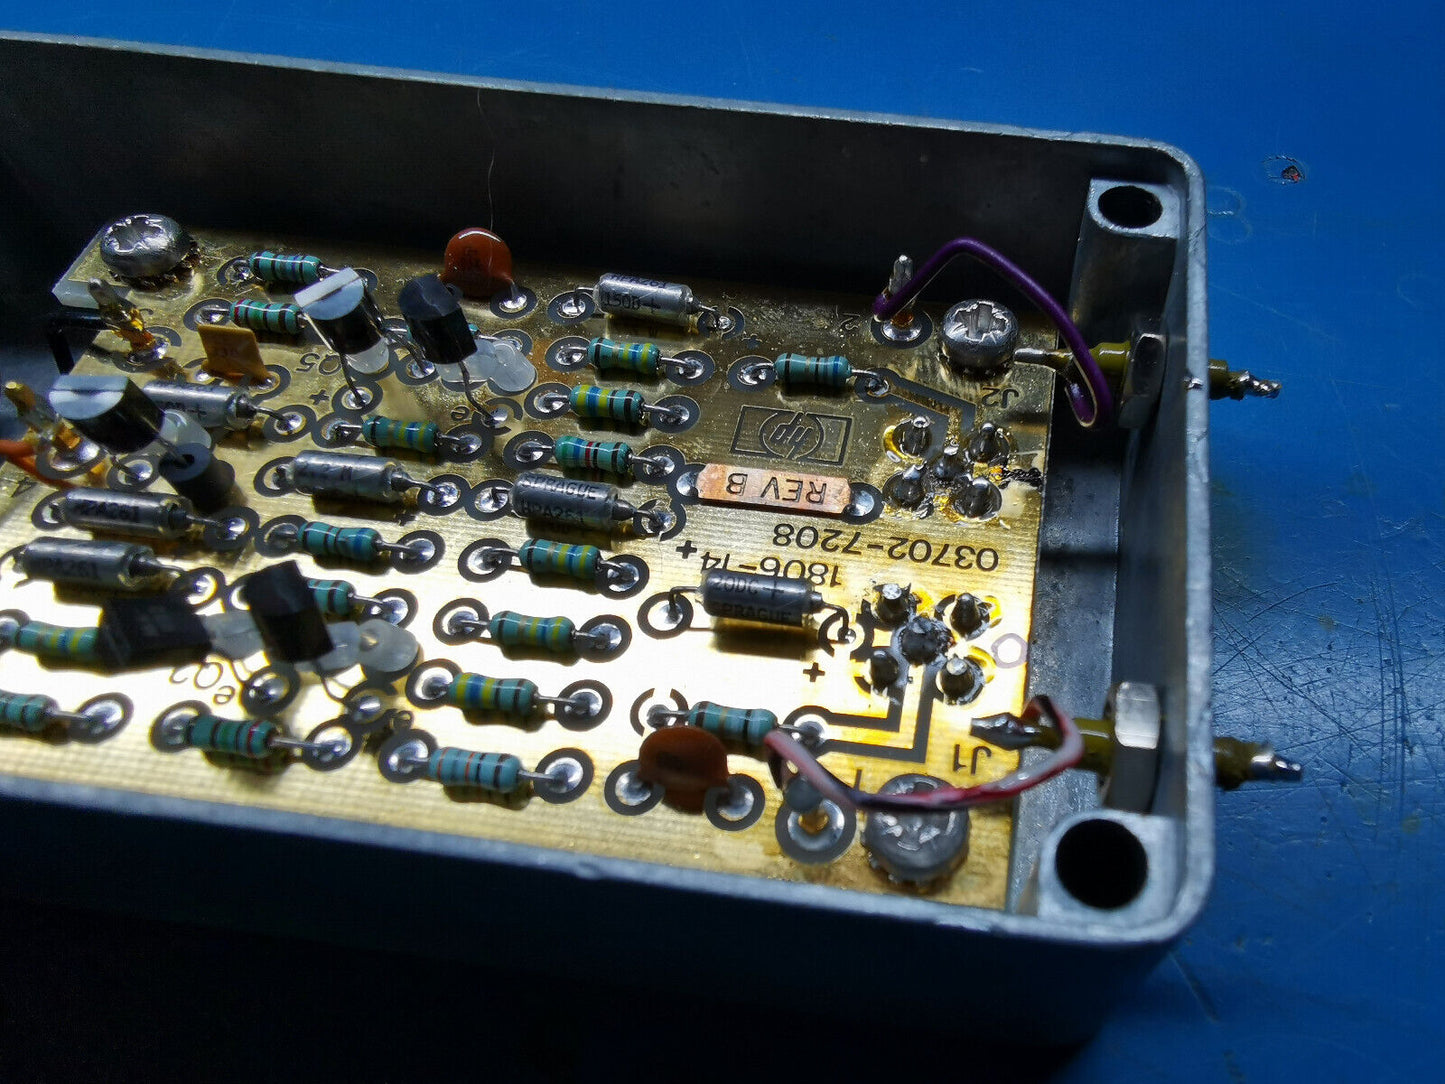 Up To 10MHz Variable Gain Amplifier Module From HP Agilent Test Gear